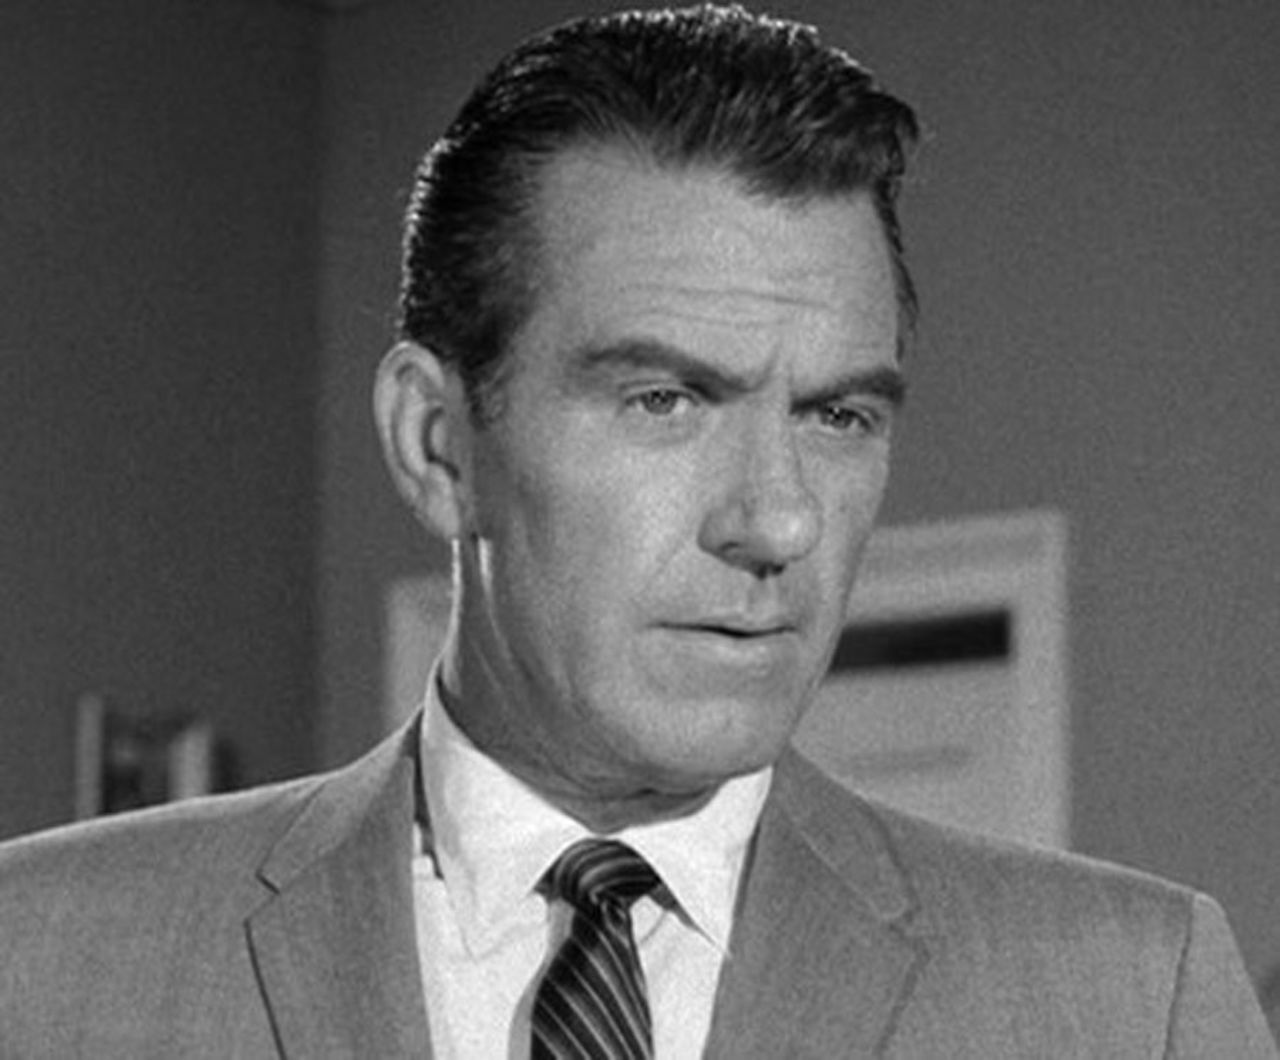 Long held as the prototype for the "perfect dad," Ward Cleaver (played by Hugh Beaumont) has resonated with families for decades. On the 1950s-'60s series "Leave It to Beaver," he was the paradigm of sage advice and discipline for Wally and Beaver. Not to mention, he was a whiz on the barbecue. A stiff white collar has never looked so good ... or paternal.